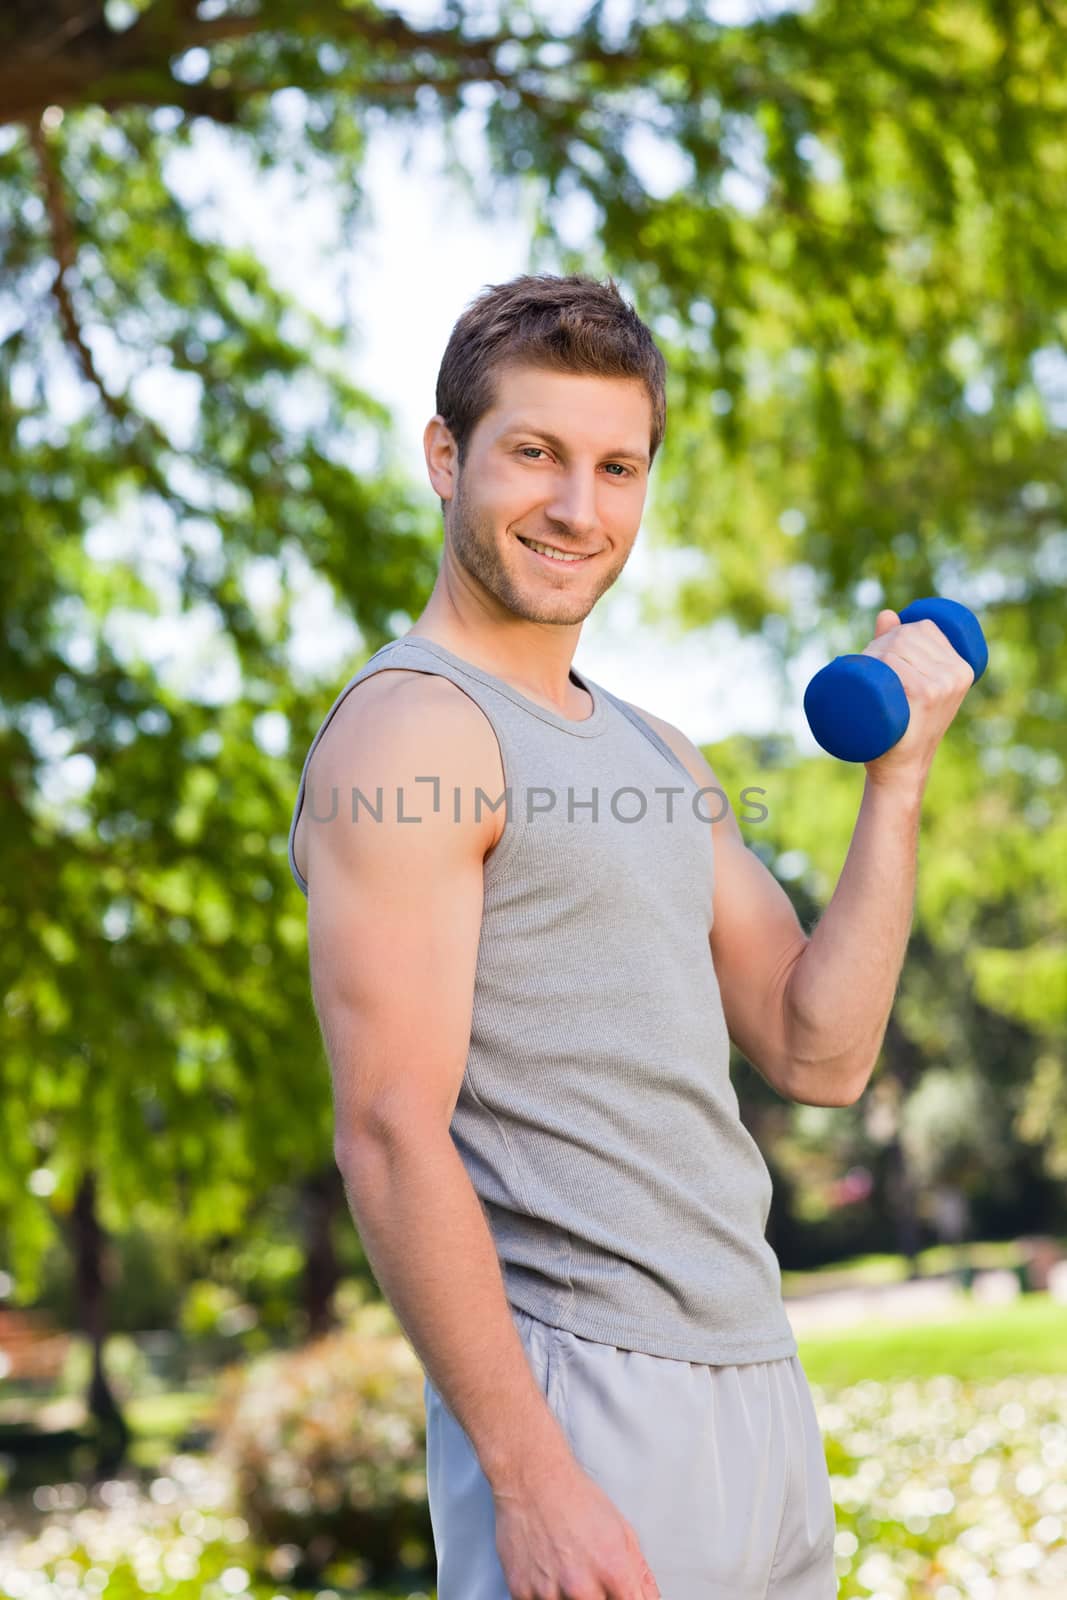 Young man doing his exercises in the park by Wavebreakmedia